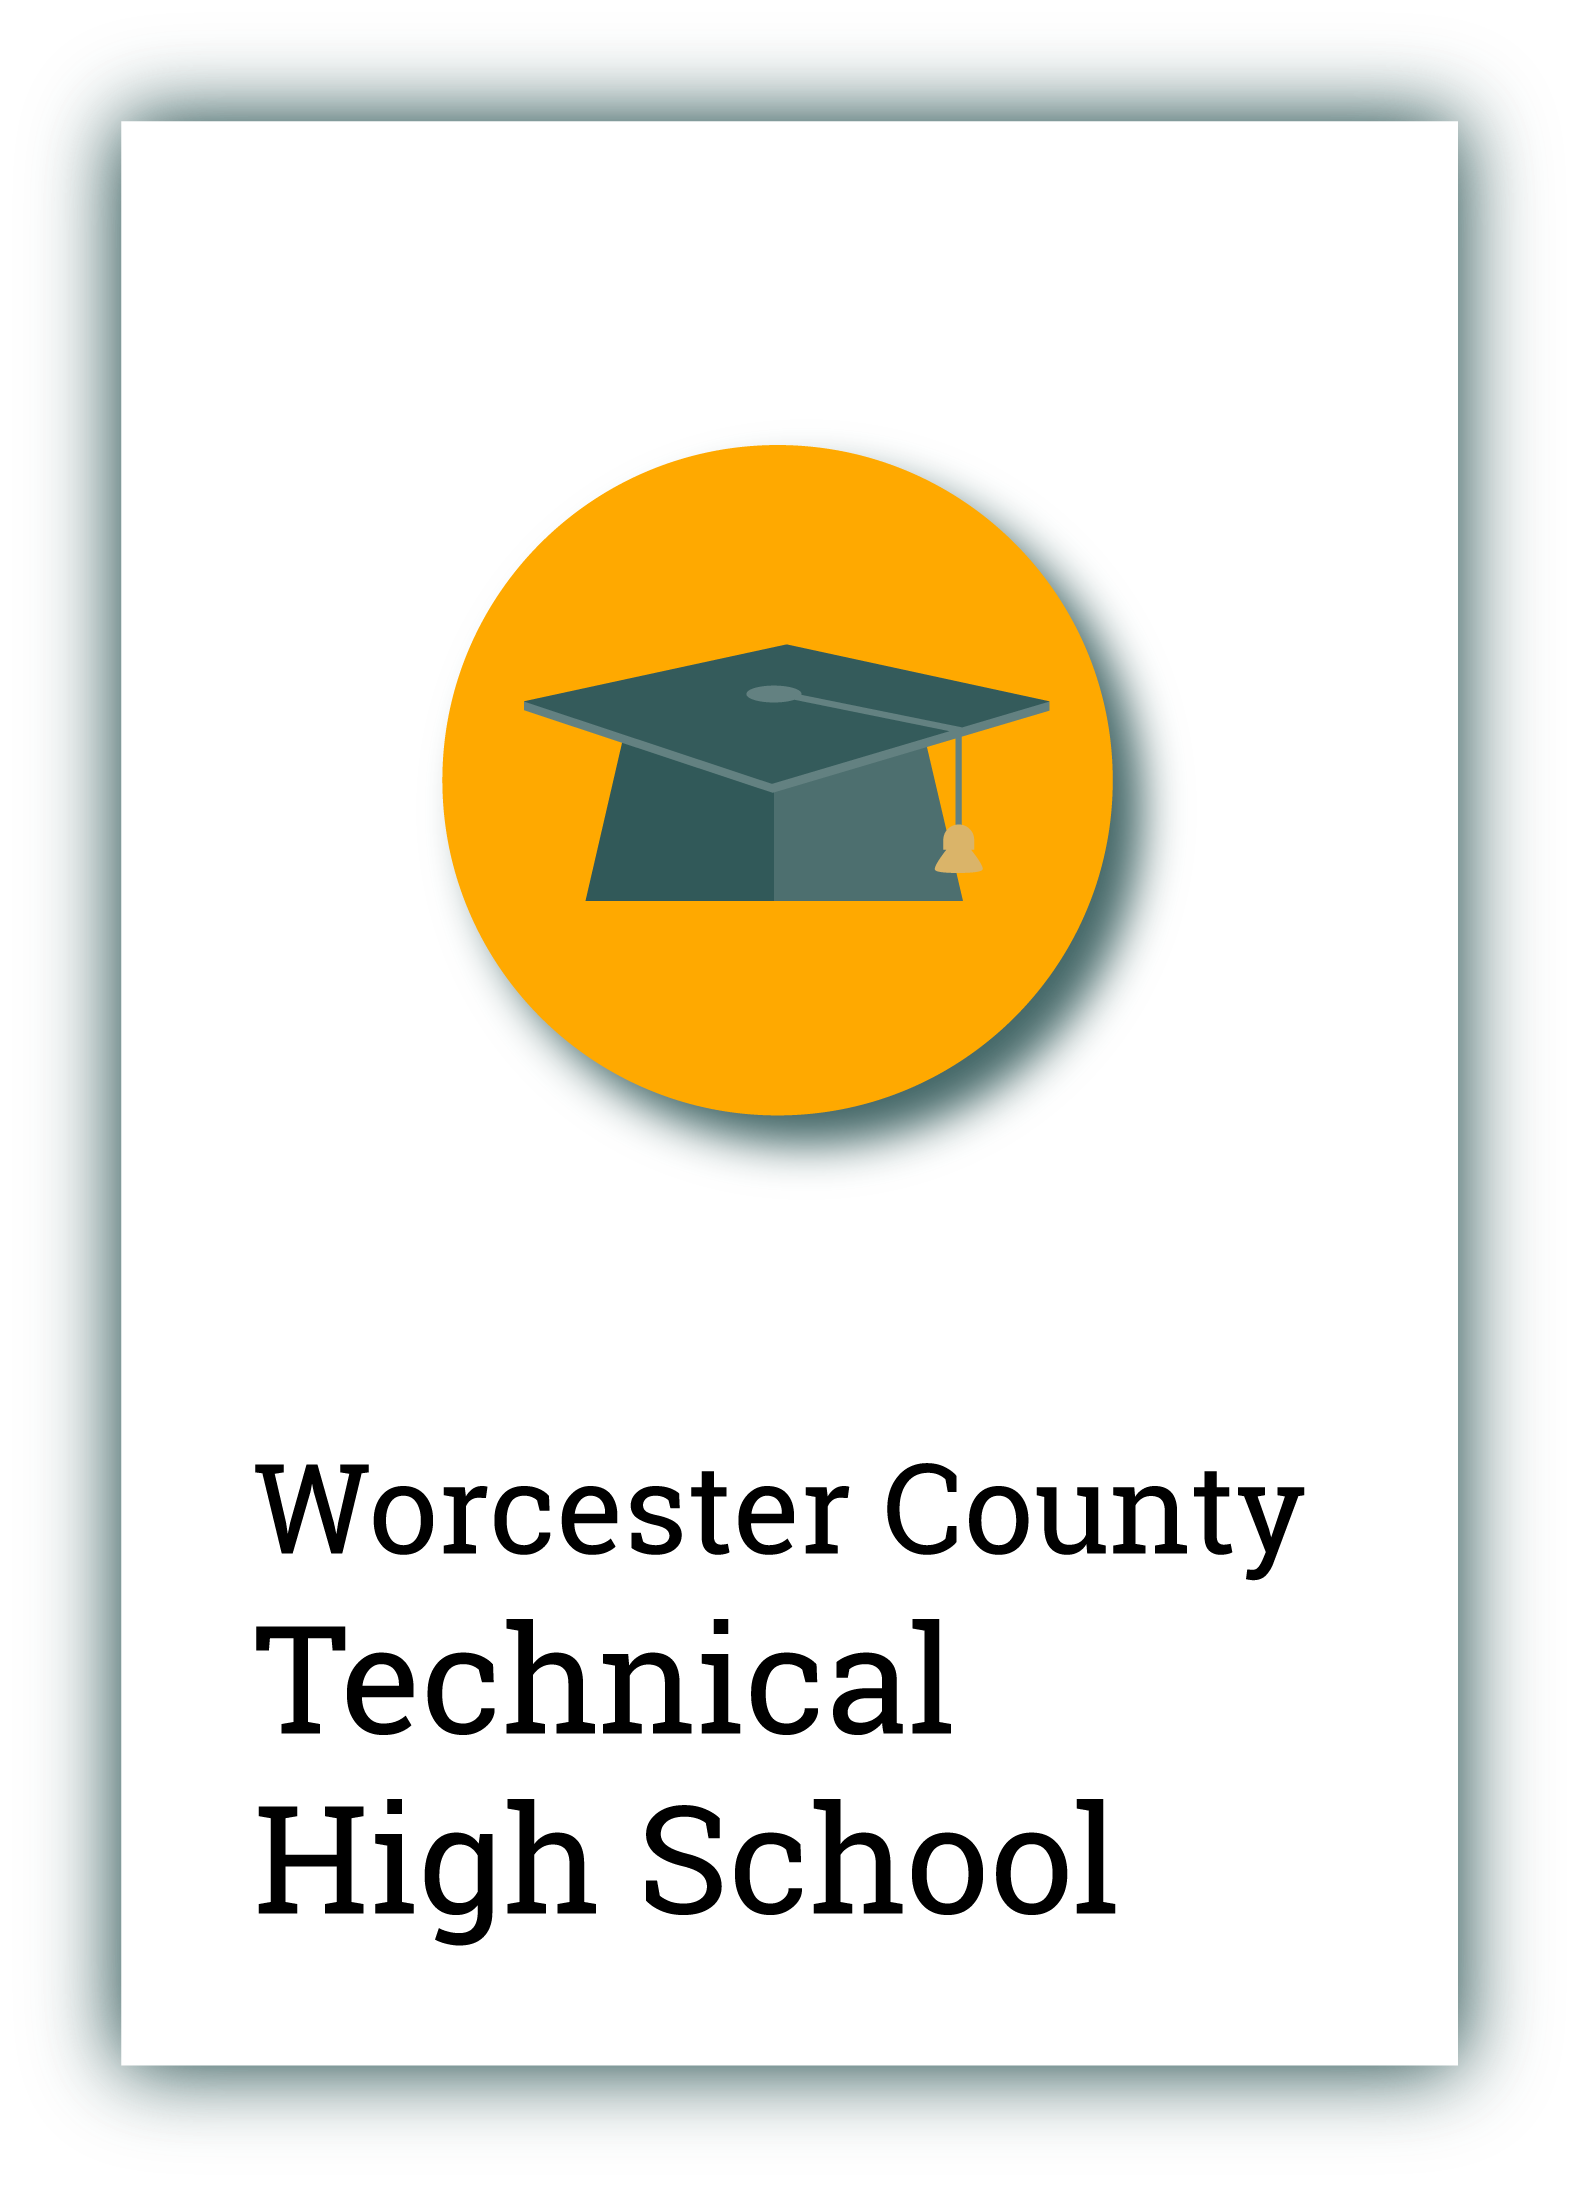 Worcester County Technical High School